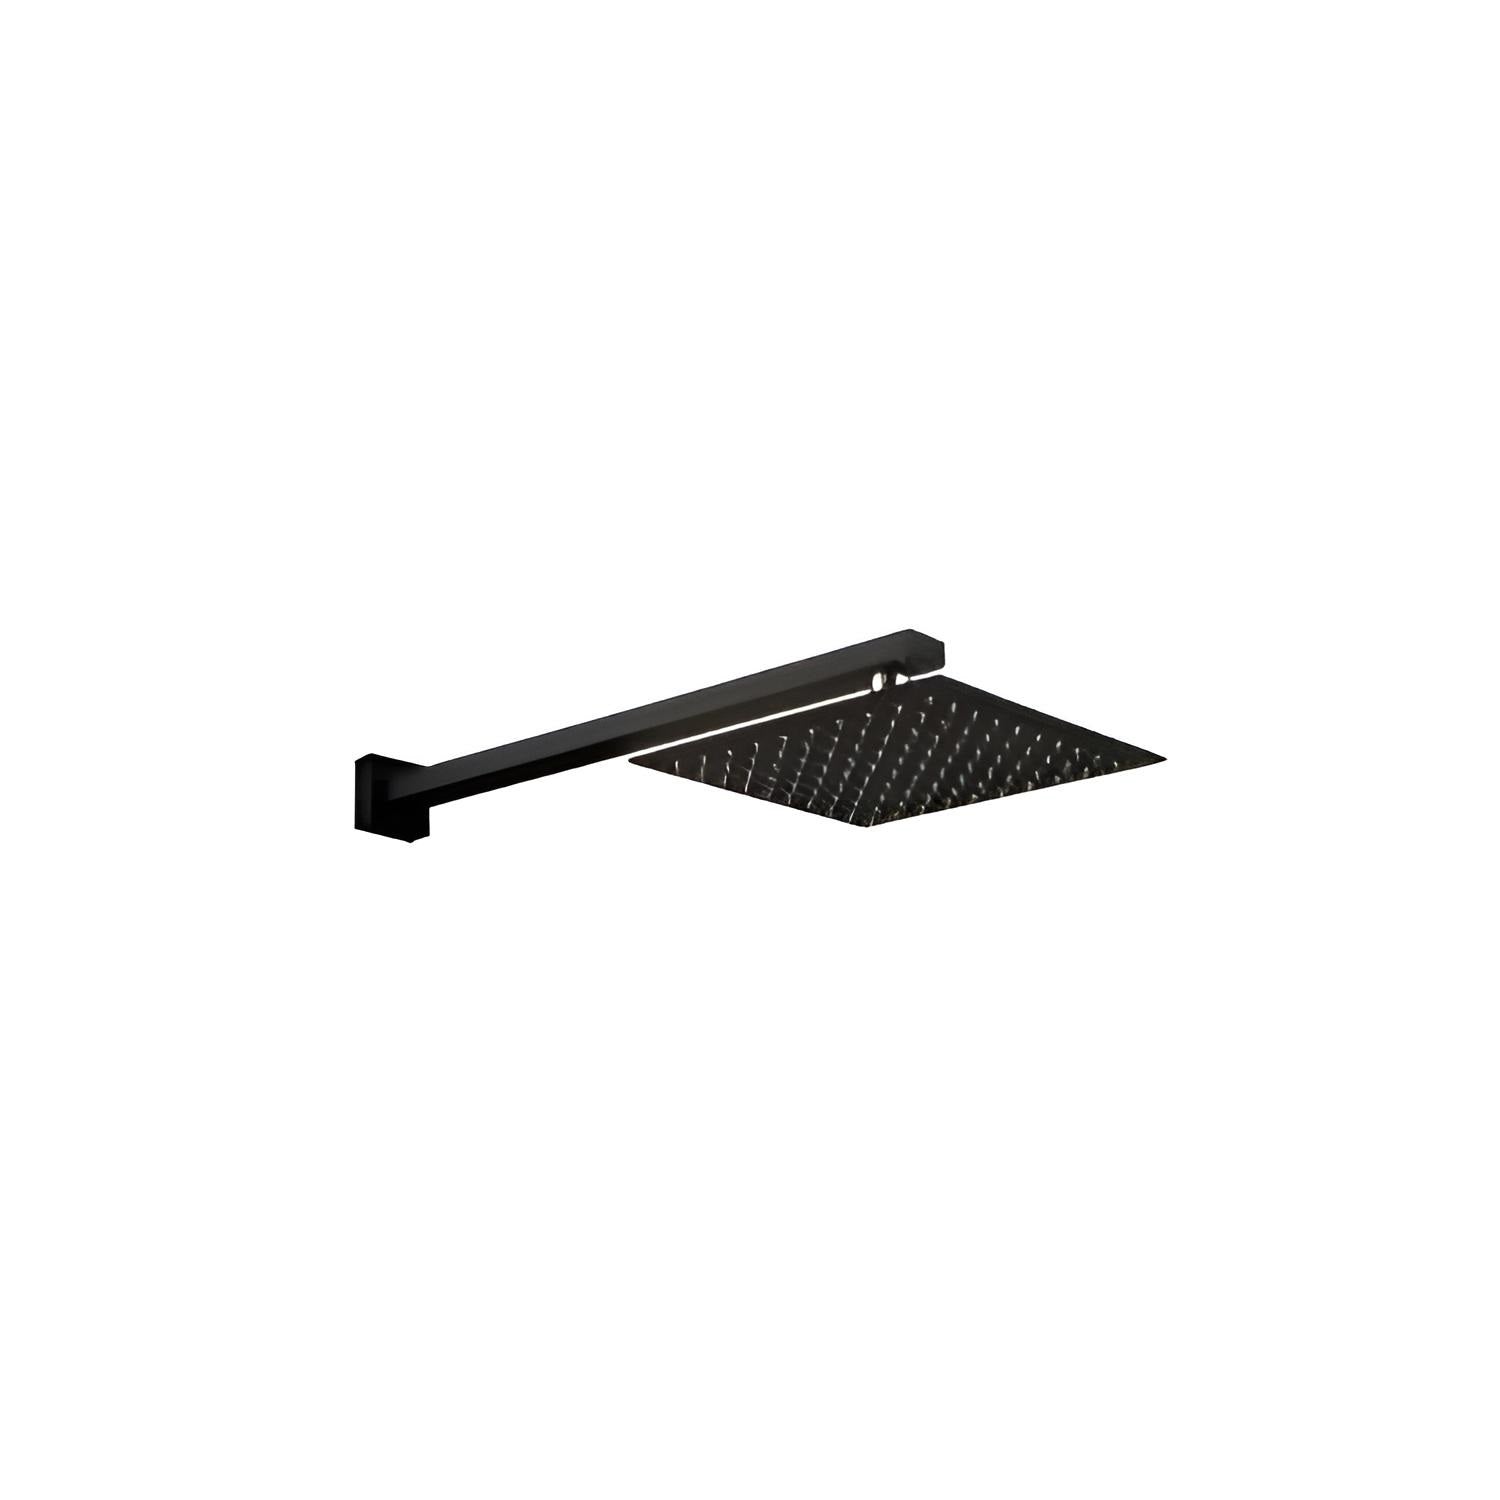 HELLYCAR ERIC WALL SHOWER ARM AND SHOWER HEAD BLACK 200MM